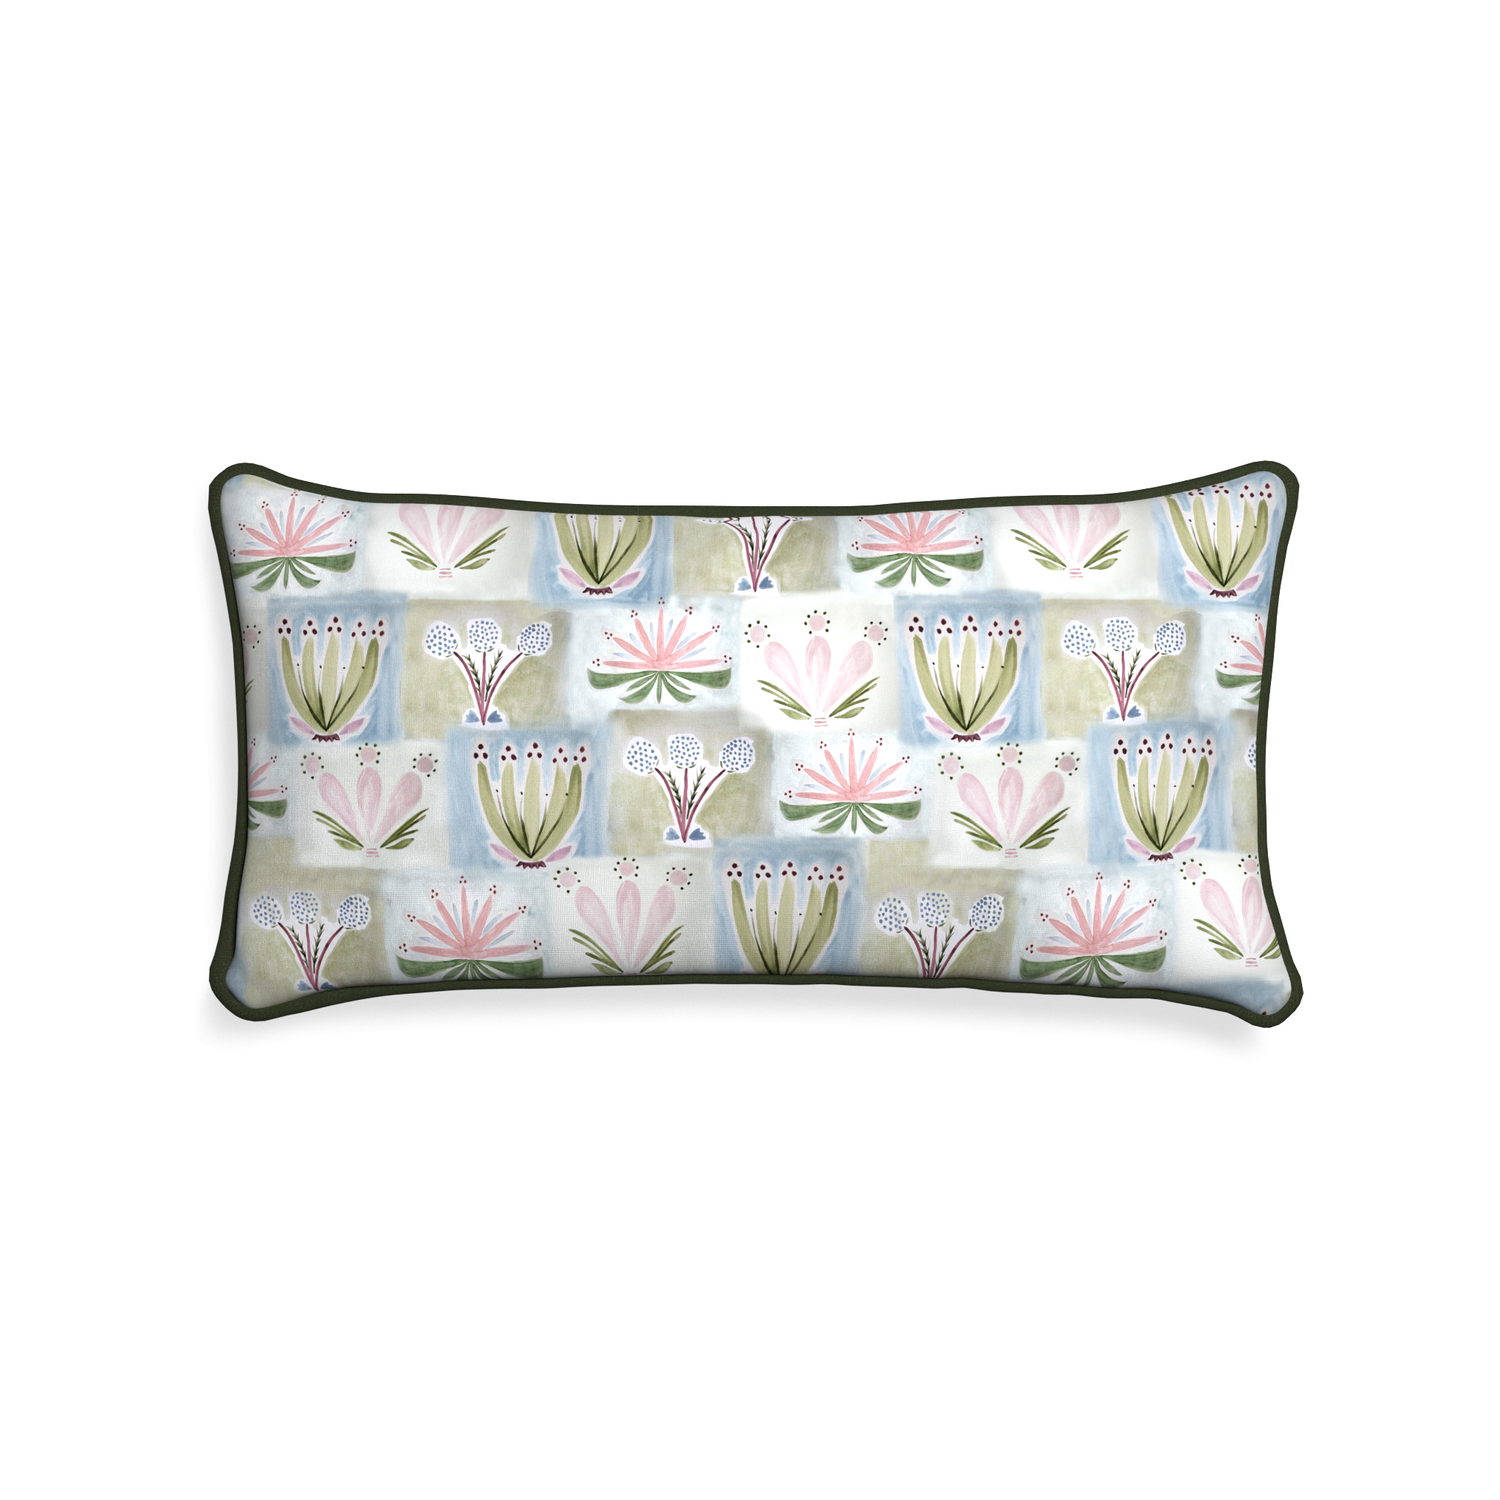 Midi-lumbar harper custom hand-painted floralpillow with f piping on white background